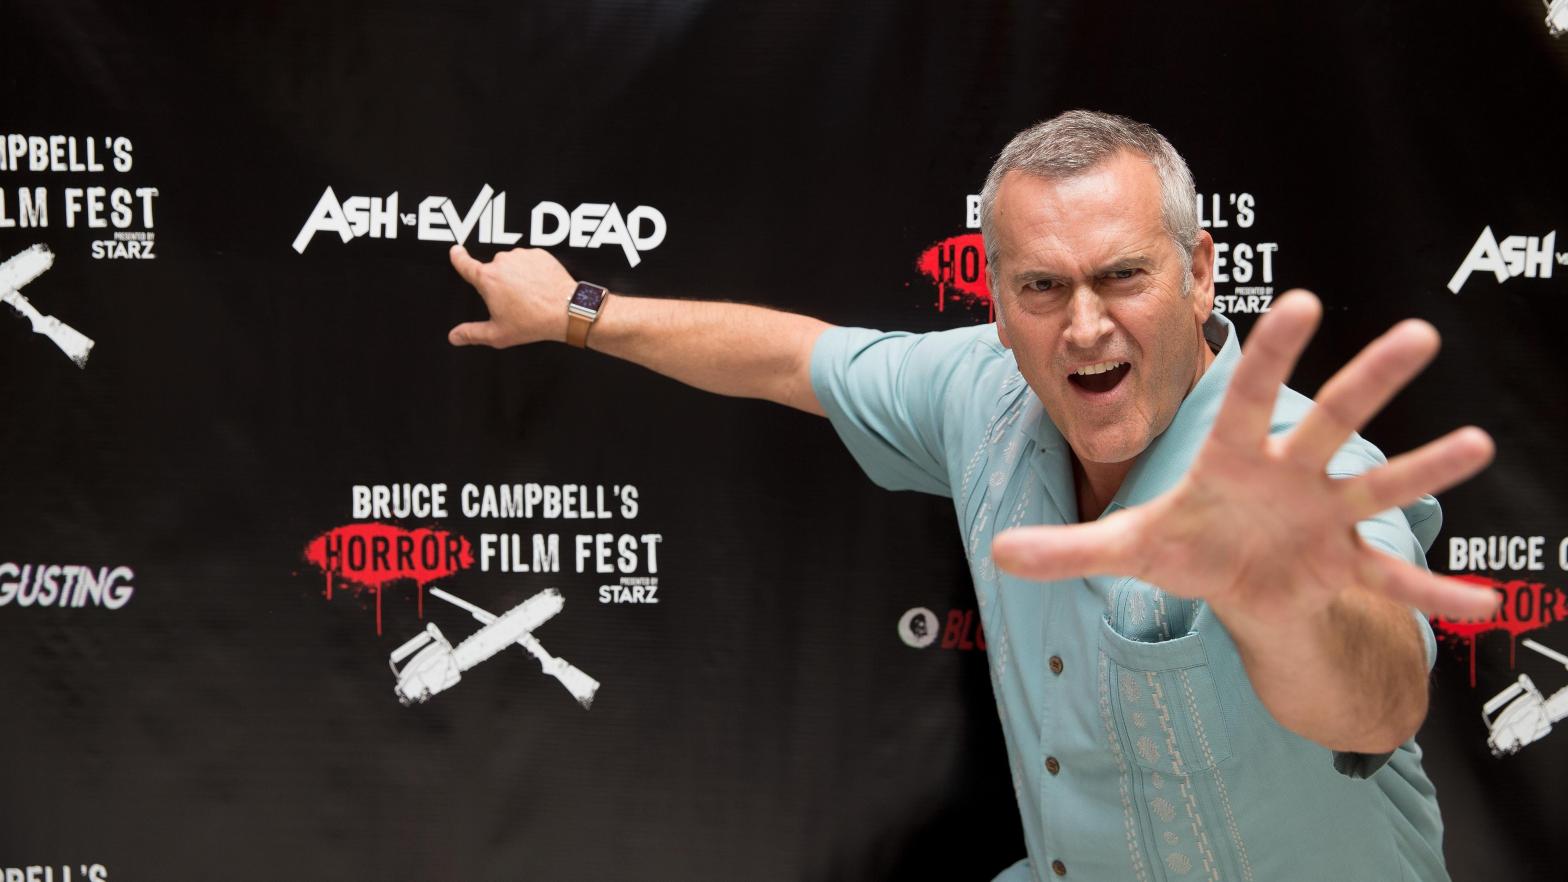 Bruce Campbell attends the Bruce Campbell Horror Film Festival on August 18, 2016 in Rosemont, Illinois. (Photo: Tasos Katopodis/Getty Images for Sony, Getty Images)